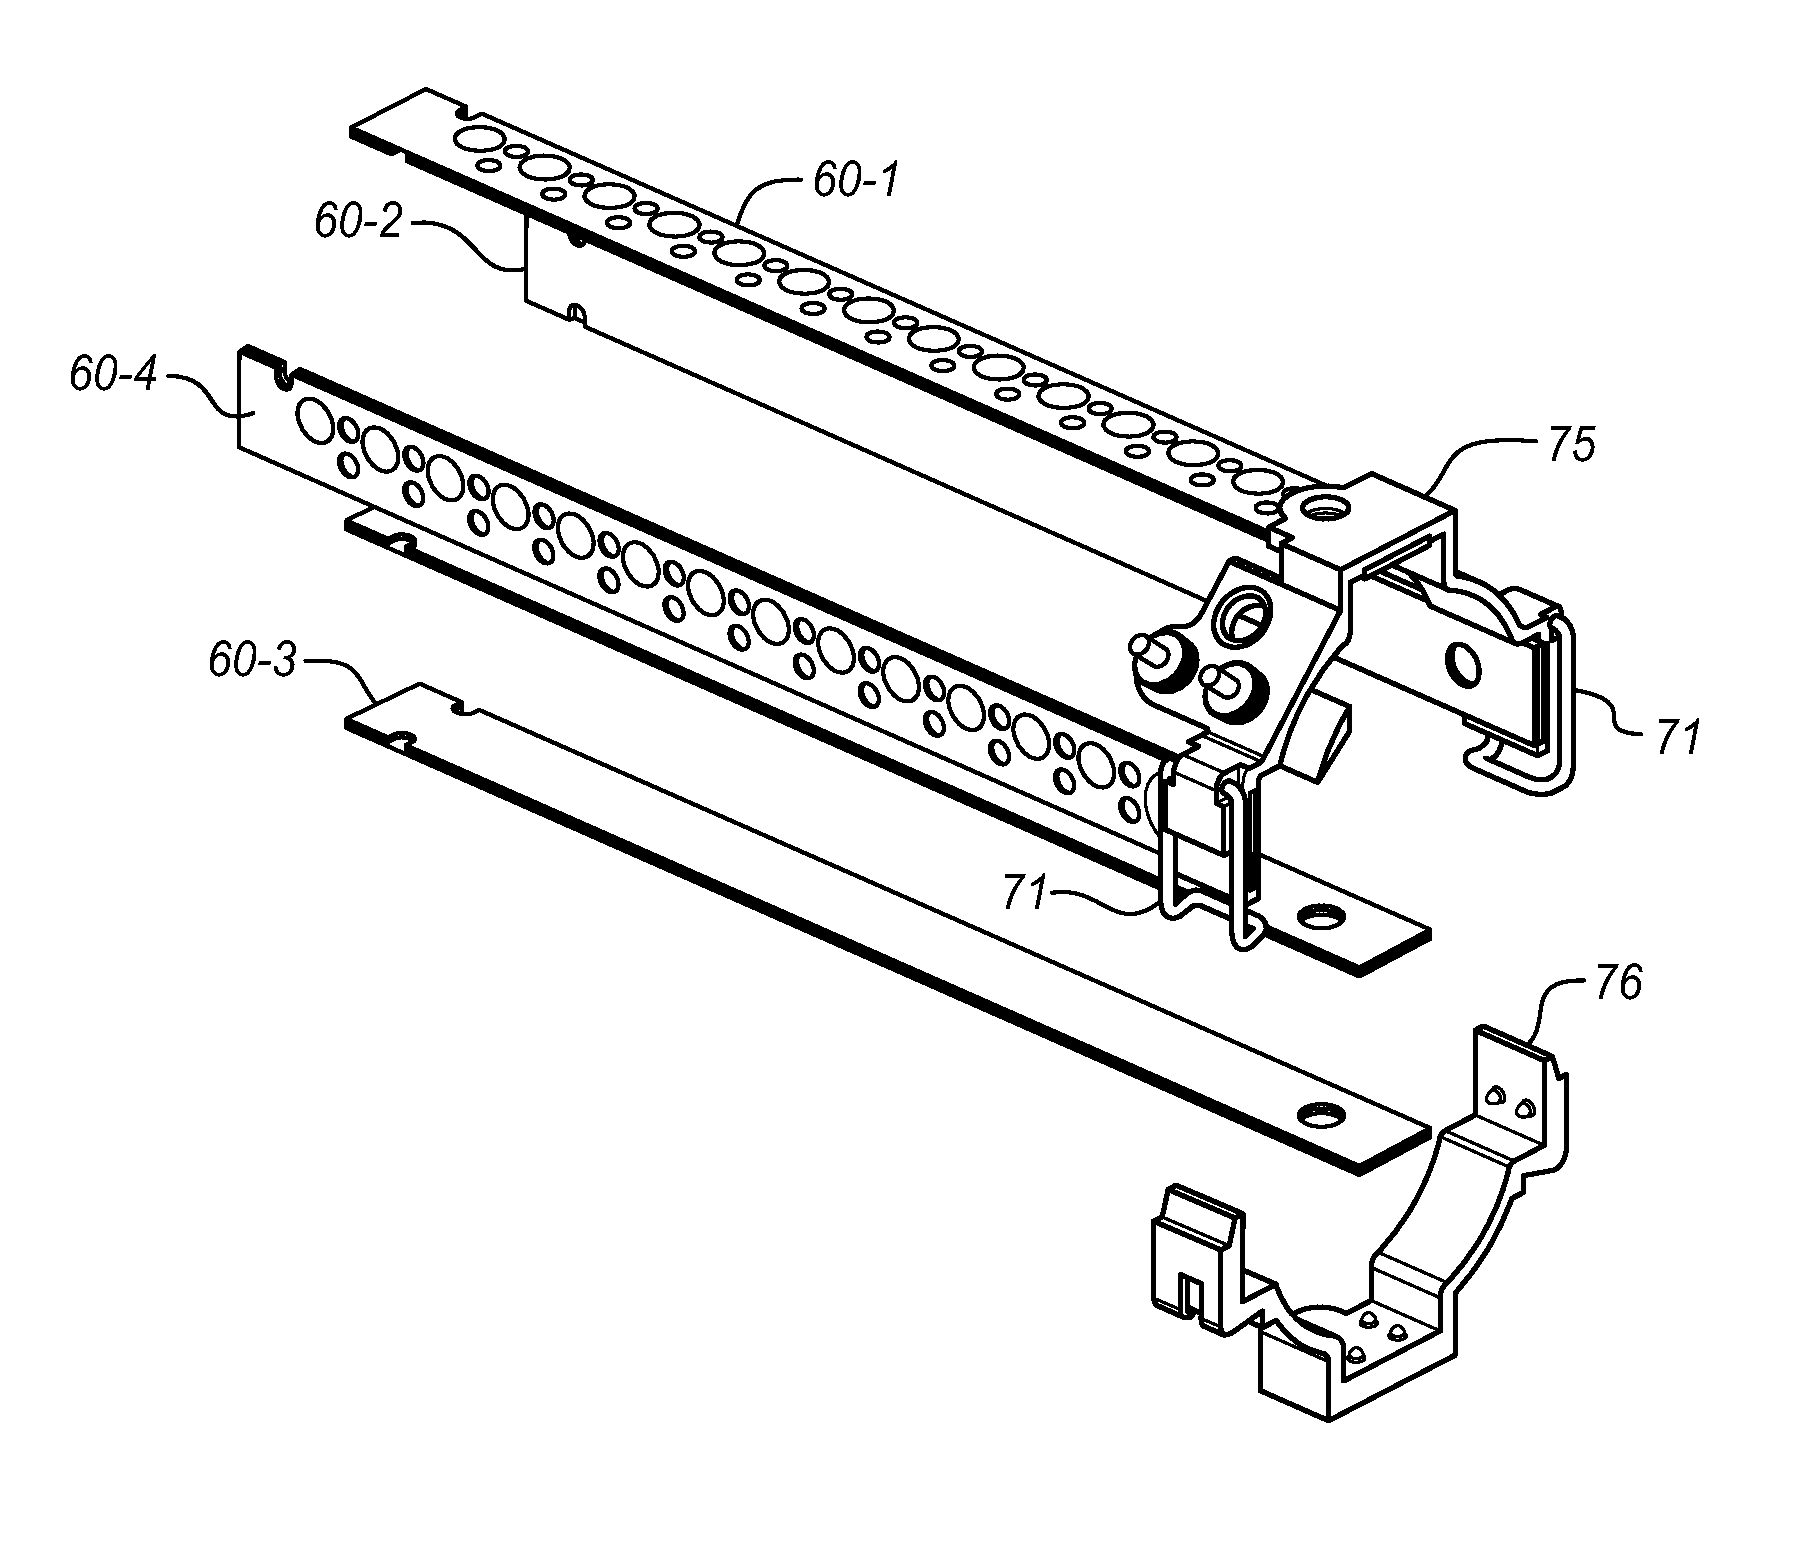 System for providing electrical power to accessories mounted on the powered